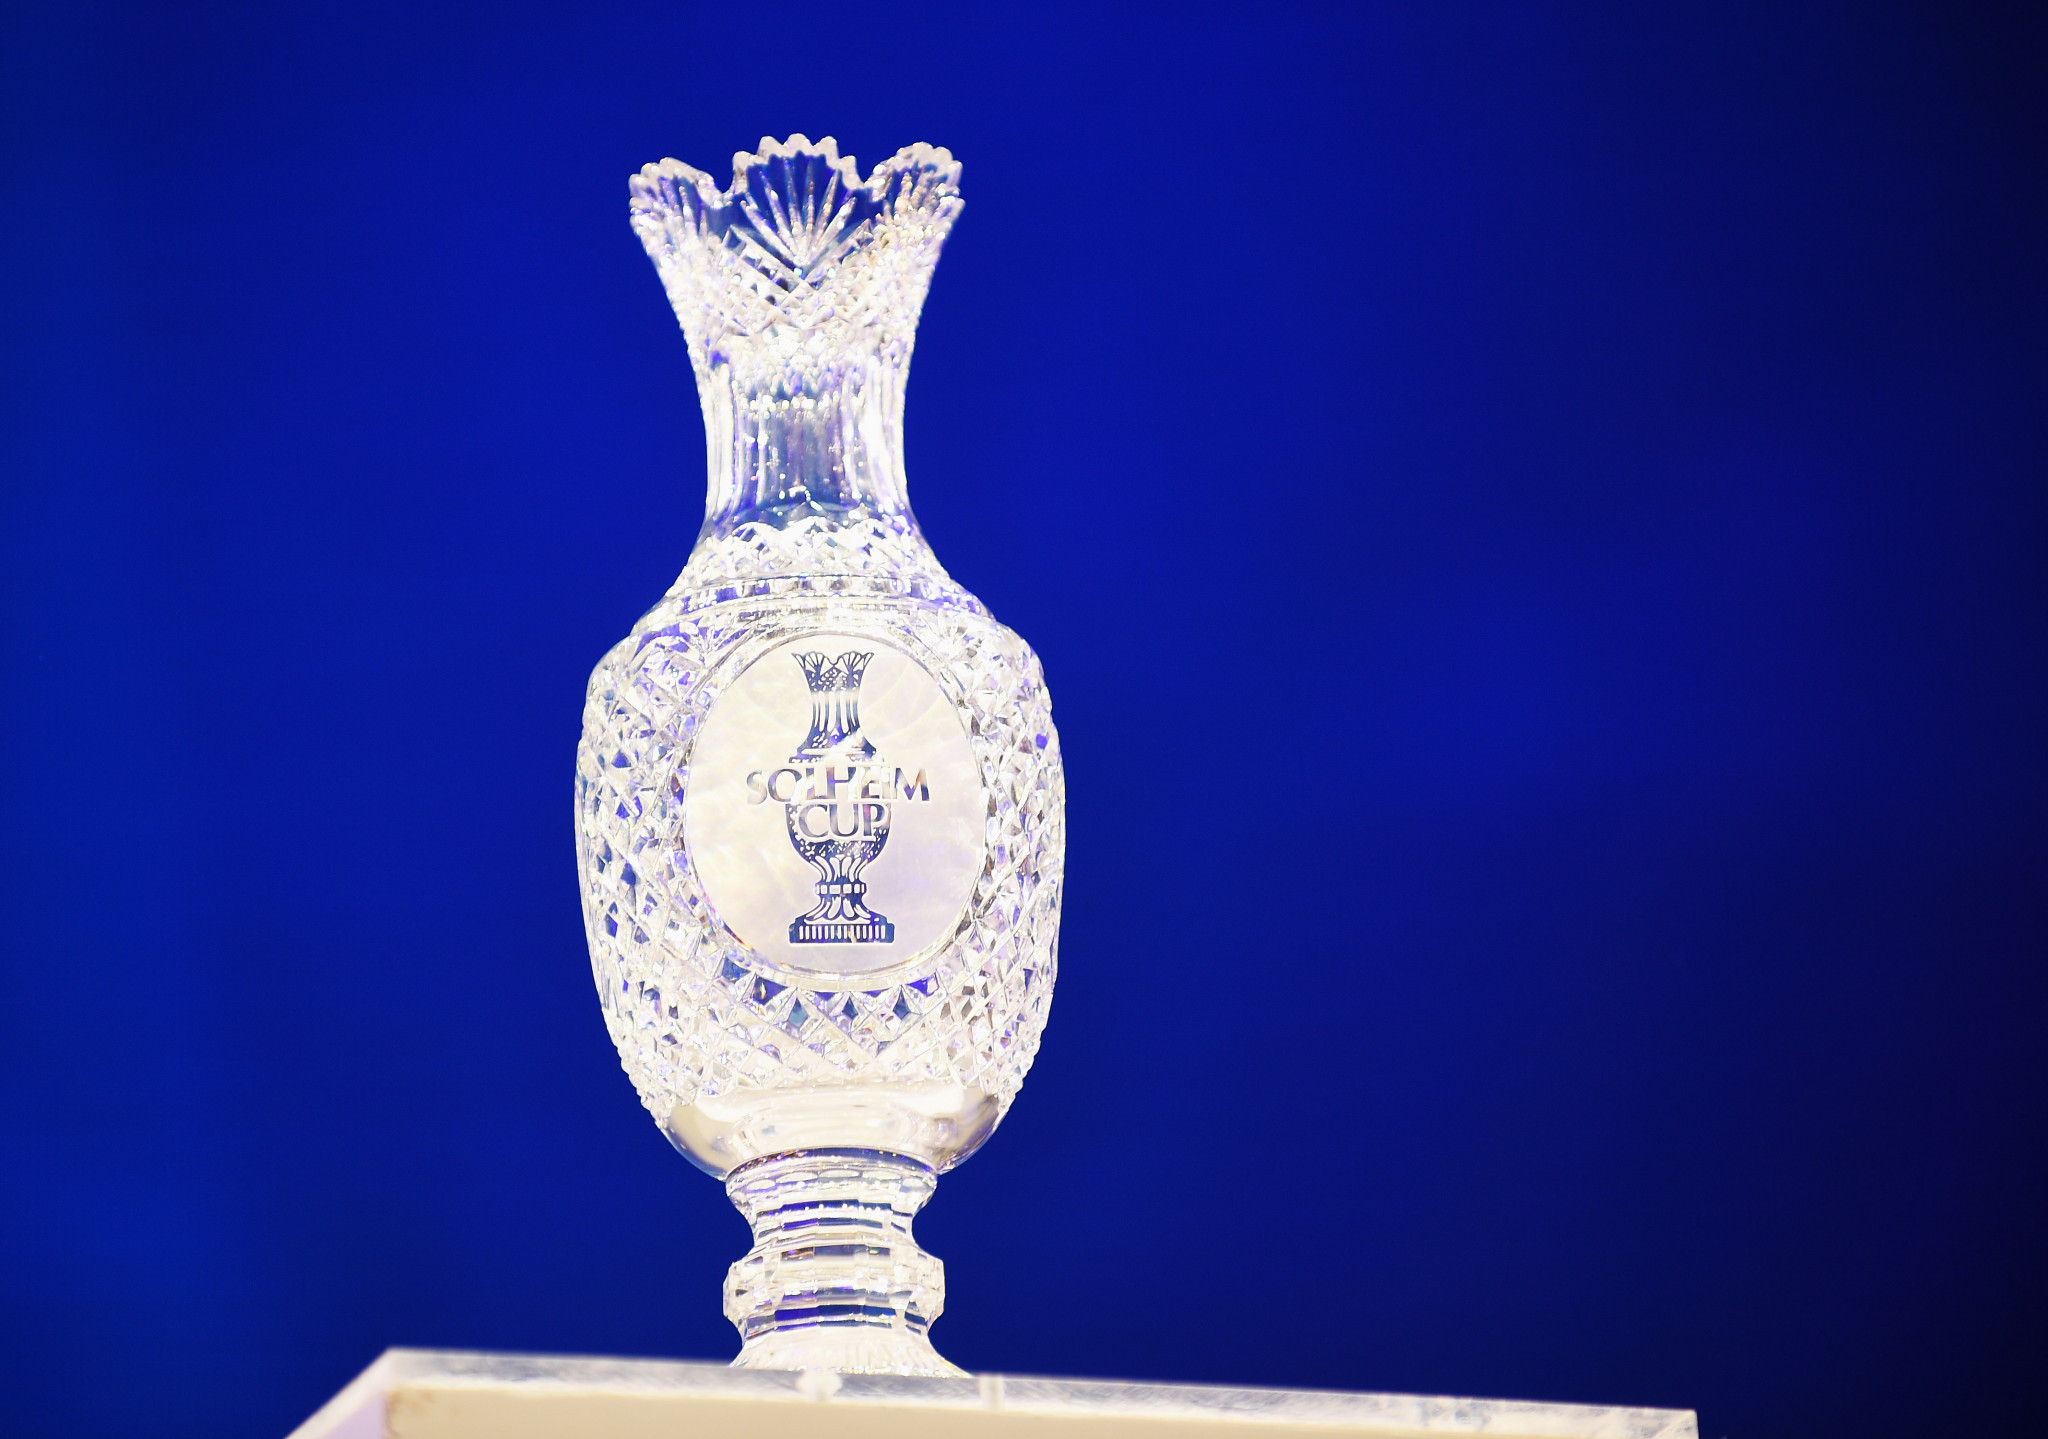 Solheim Cup moved to even years from 2024 to avoid Ryder Cup clashes